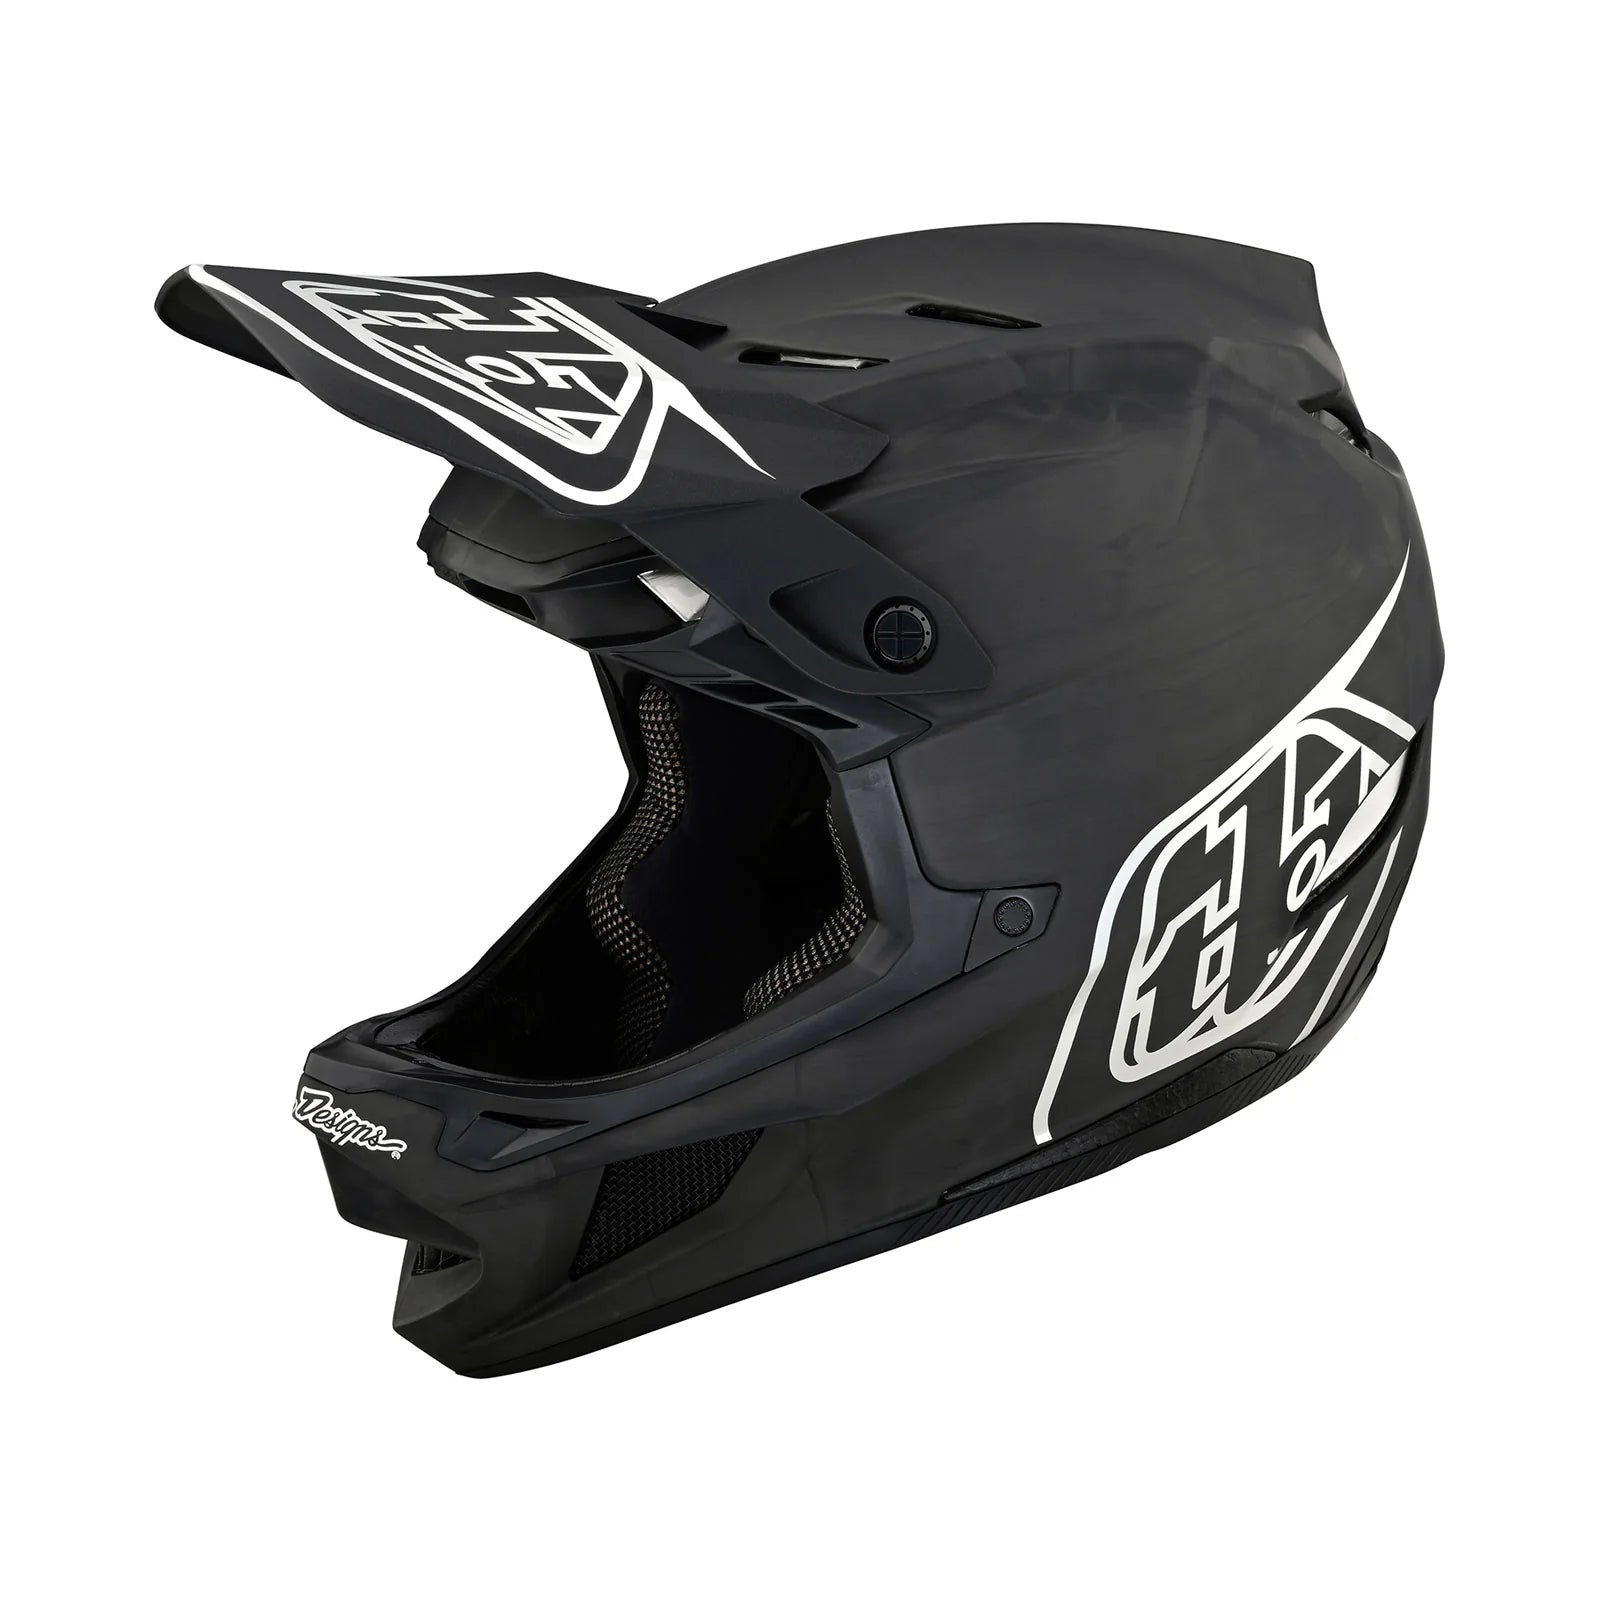 The TLD D4 AS Carbon W/MIPS Helmet Black / Silver is shown on a white background.